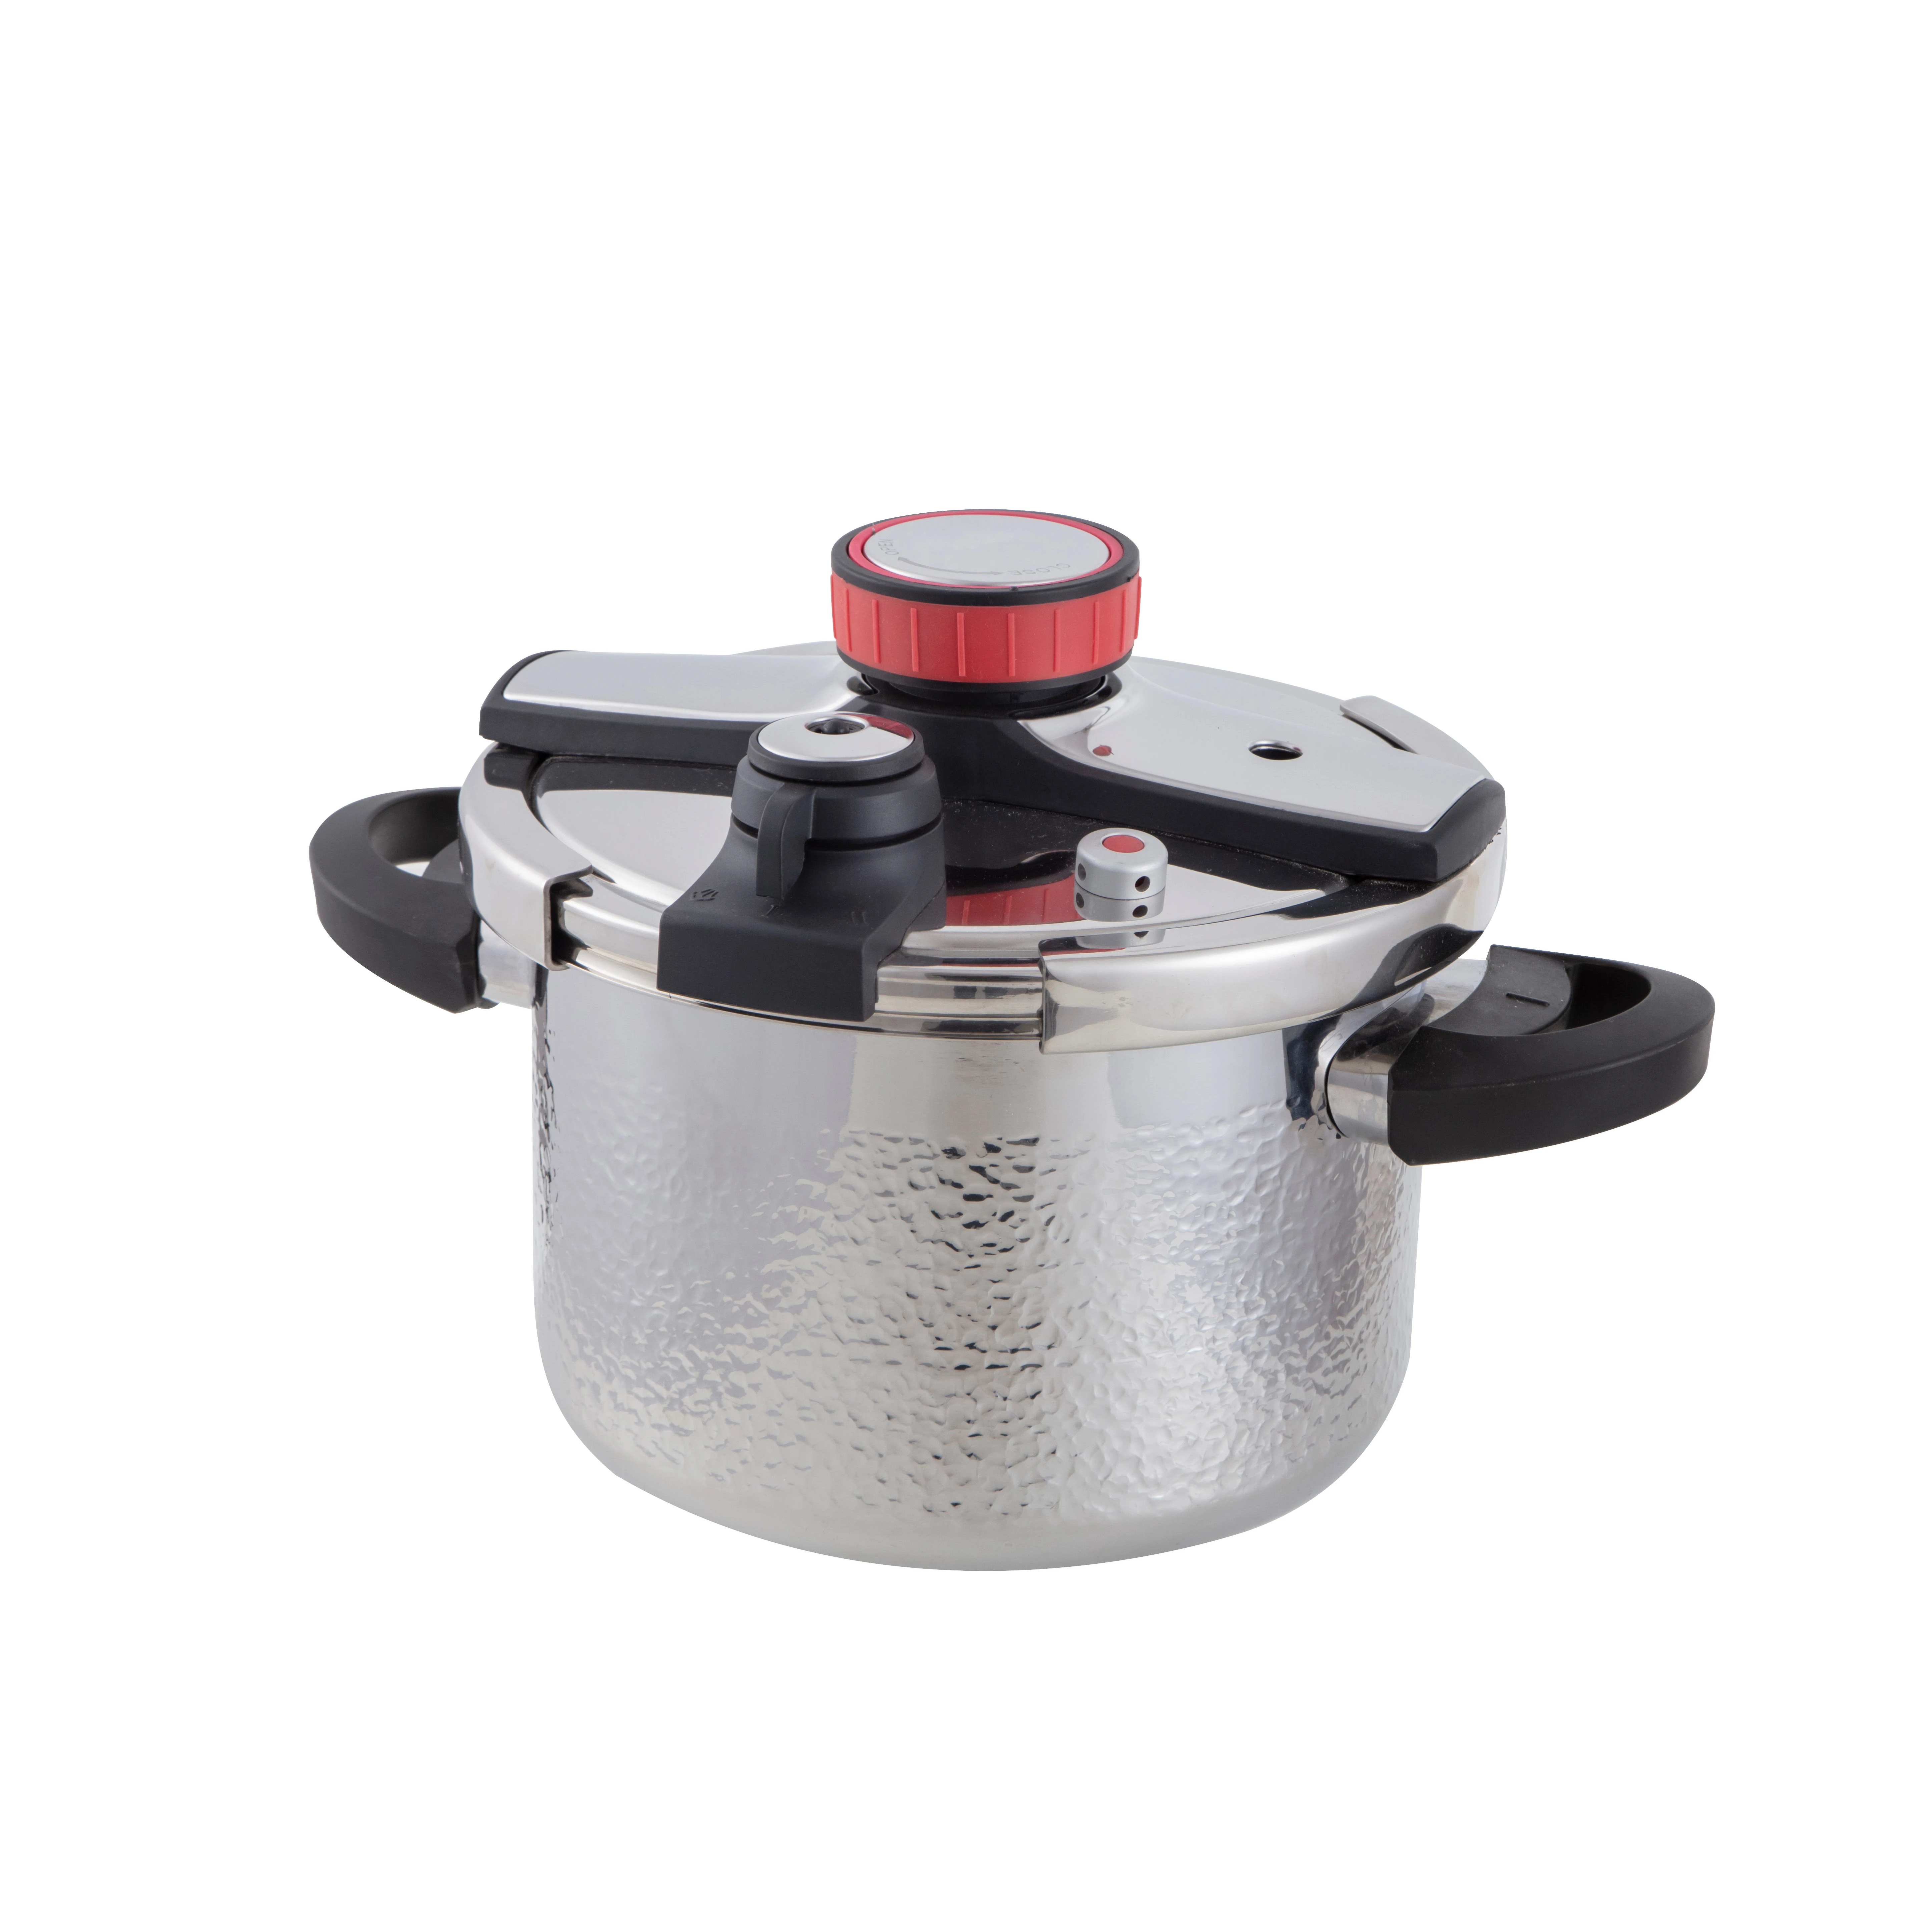 Commercial Pressure Cookers: Stainless Steel & Induction